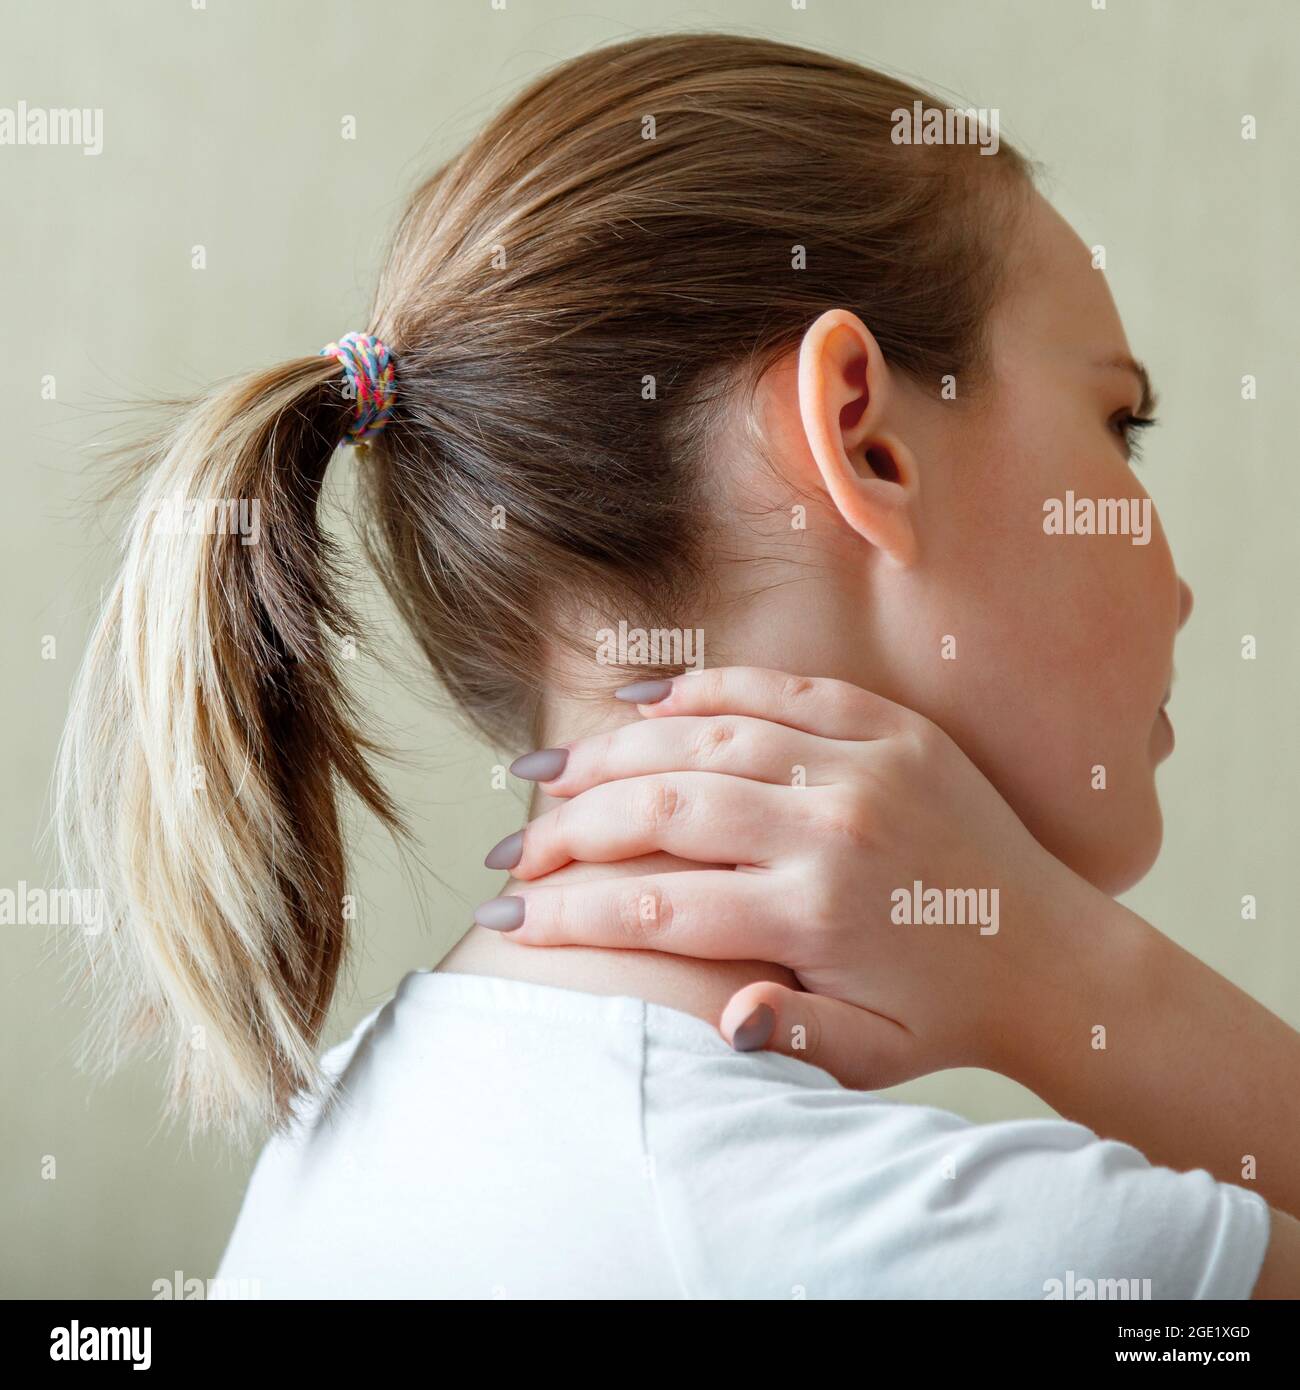 https://c8.alamy.com/comp/2GE1XGD/neck-shoulder-pain-cervical-vertebrae-woman-holds-neck-with-pain-cervical-muscle-spasm-by-hand-disease-of-musculoskeletal-system-in-young-woman-2GE1XGD.jpg